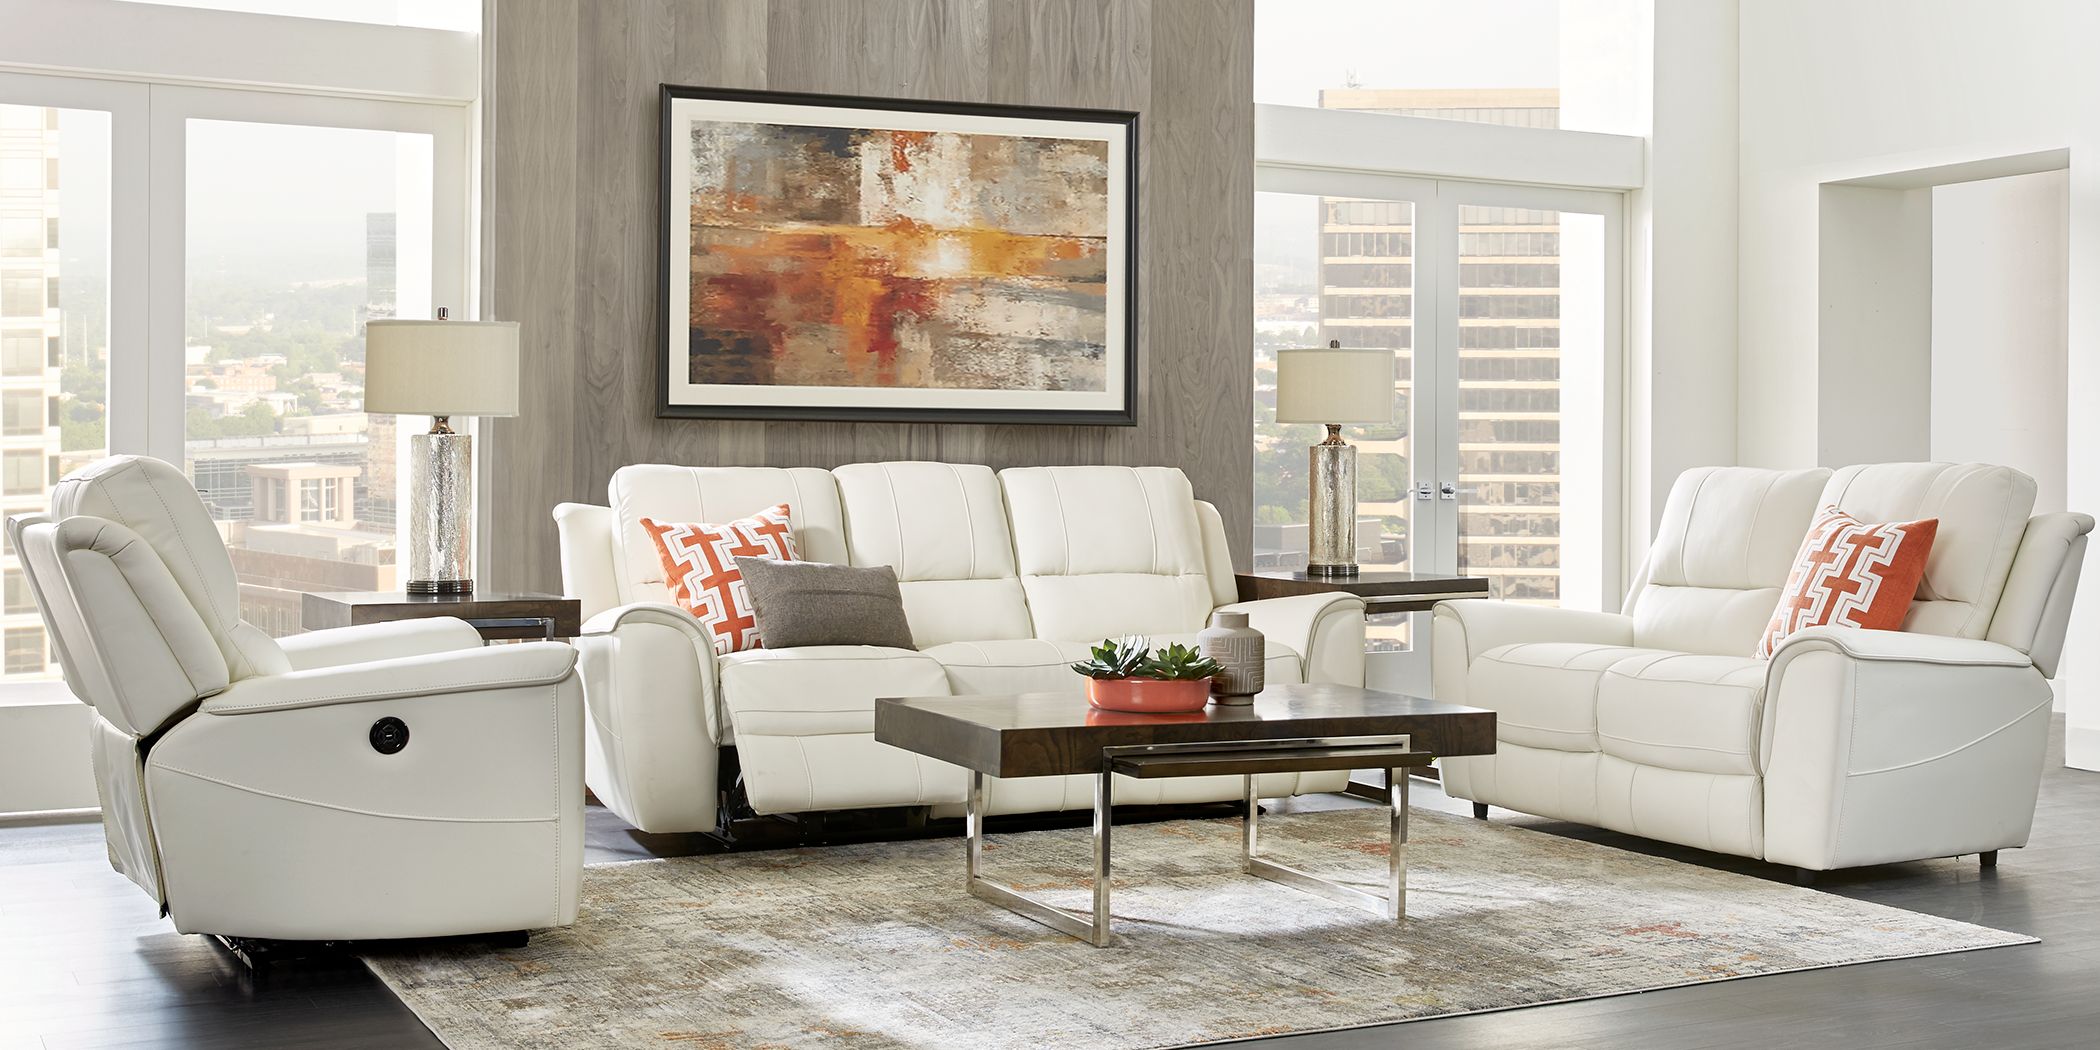 Lanzo Off White Leather 2 Pc Living, Off White Leather Living Room Furniture